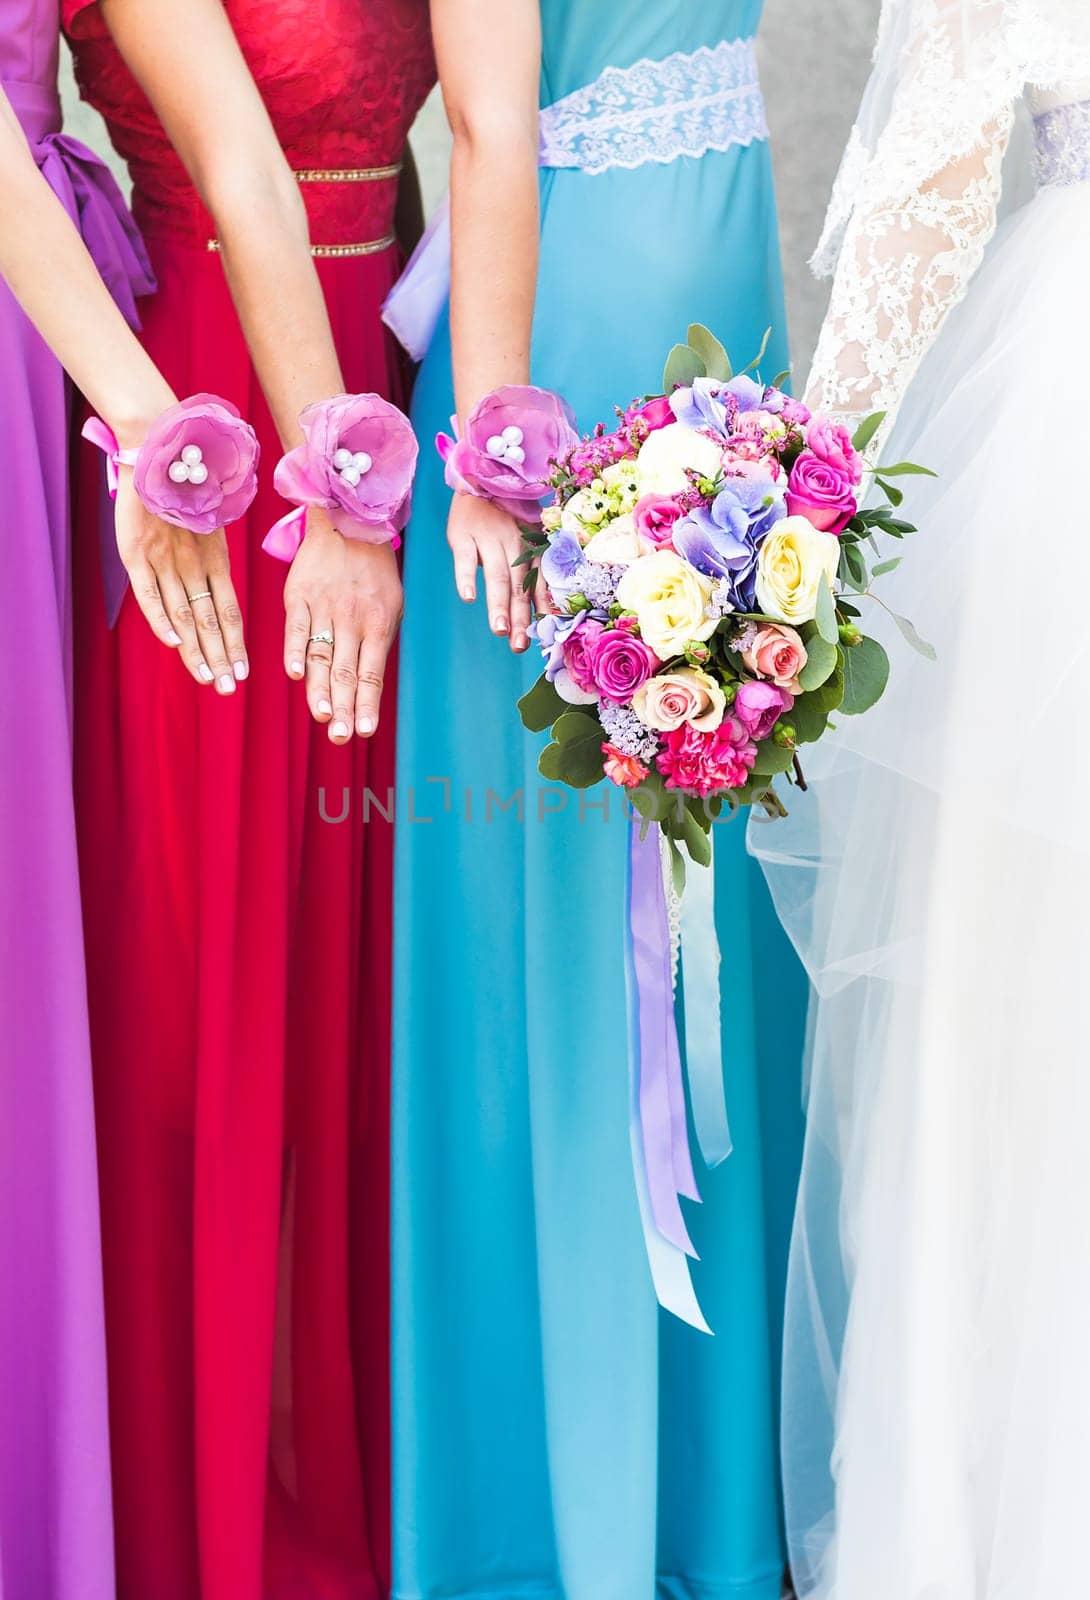 Close up of bride and bridesmaids bouquets by Satura86